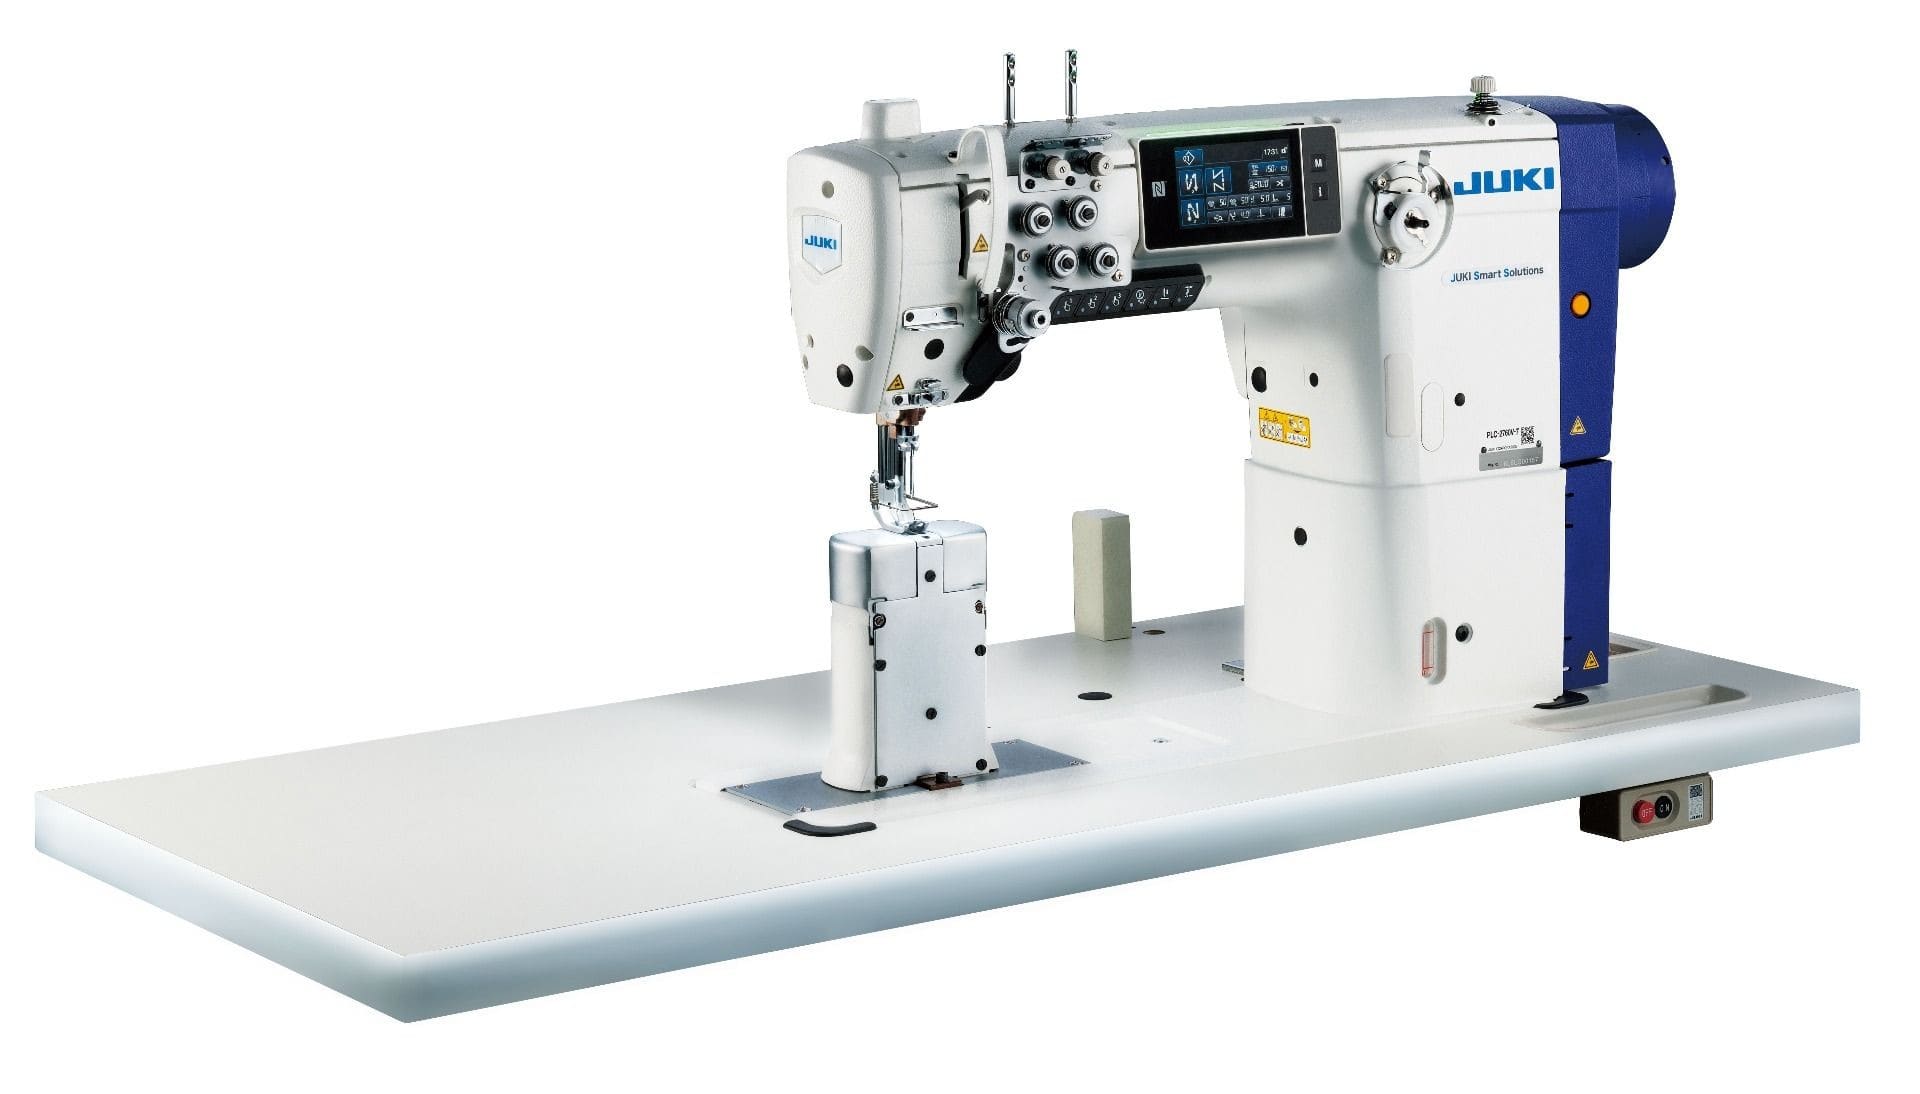 JUKI PLC-2700V-7 Series
Semi-dry Direct-drive, Post-bed, Unison-feed, Lockstitch Sewing System with Vertical-axis Large Hook
PLC-2710V-7
PLC-2760V-7